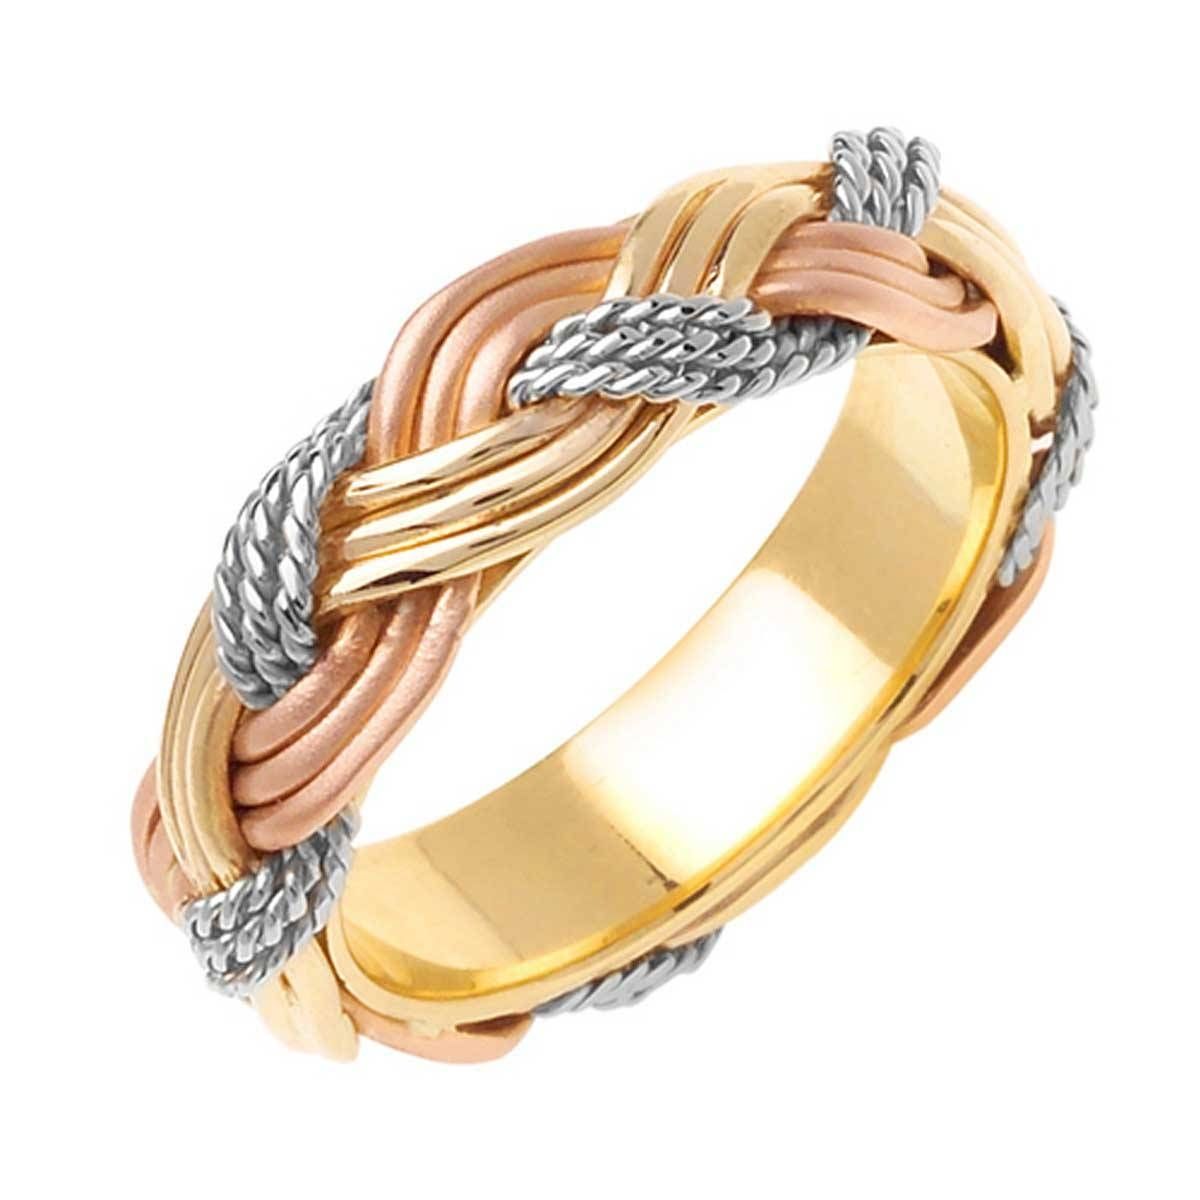 14k Tri Color Gold African Braid Band 6mm 3002747 Shop At Regarding Three Color Braided Wedding Bands 